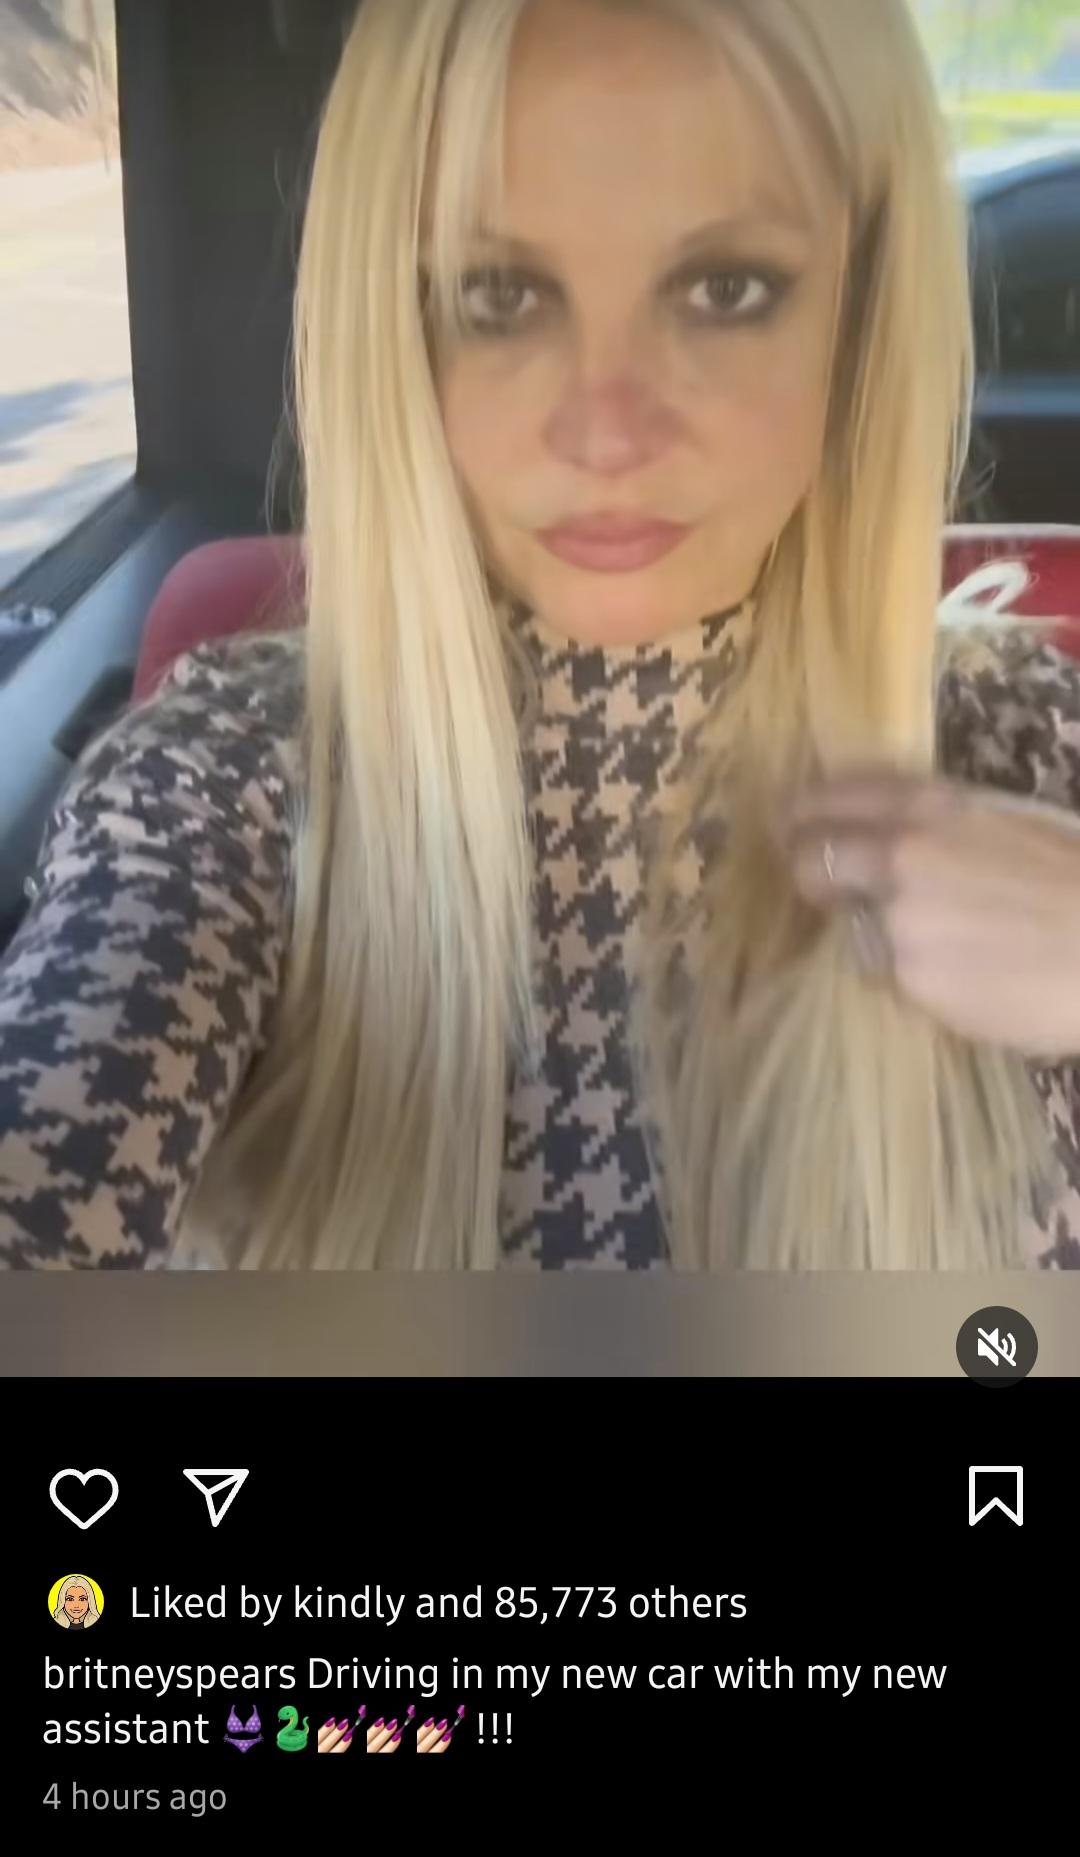 Britney Spears has a new car and a new assistant